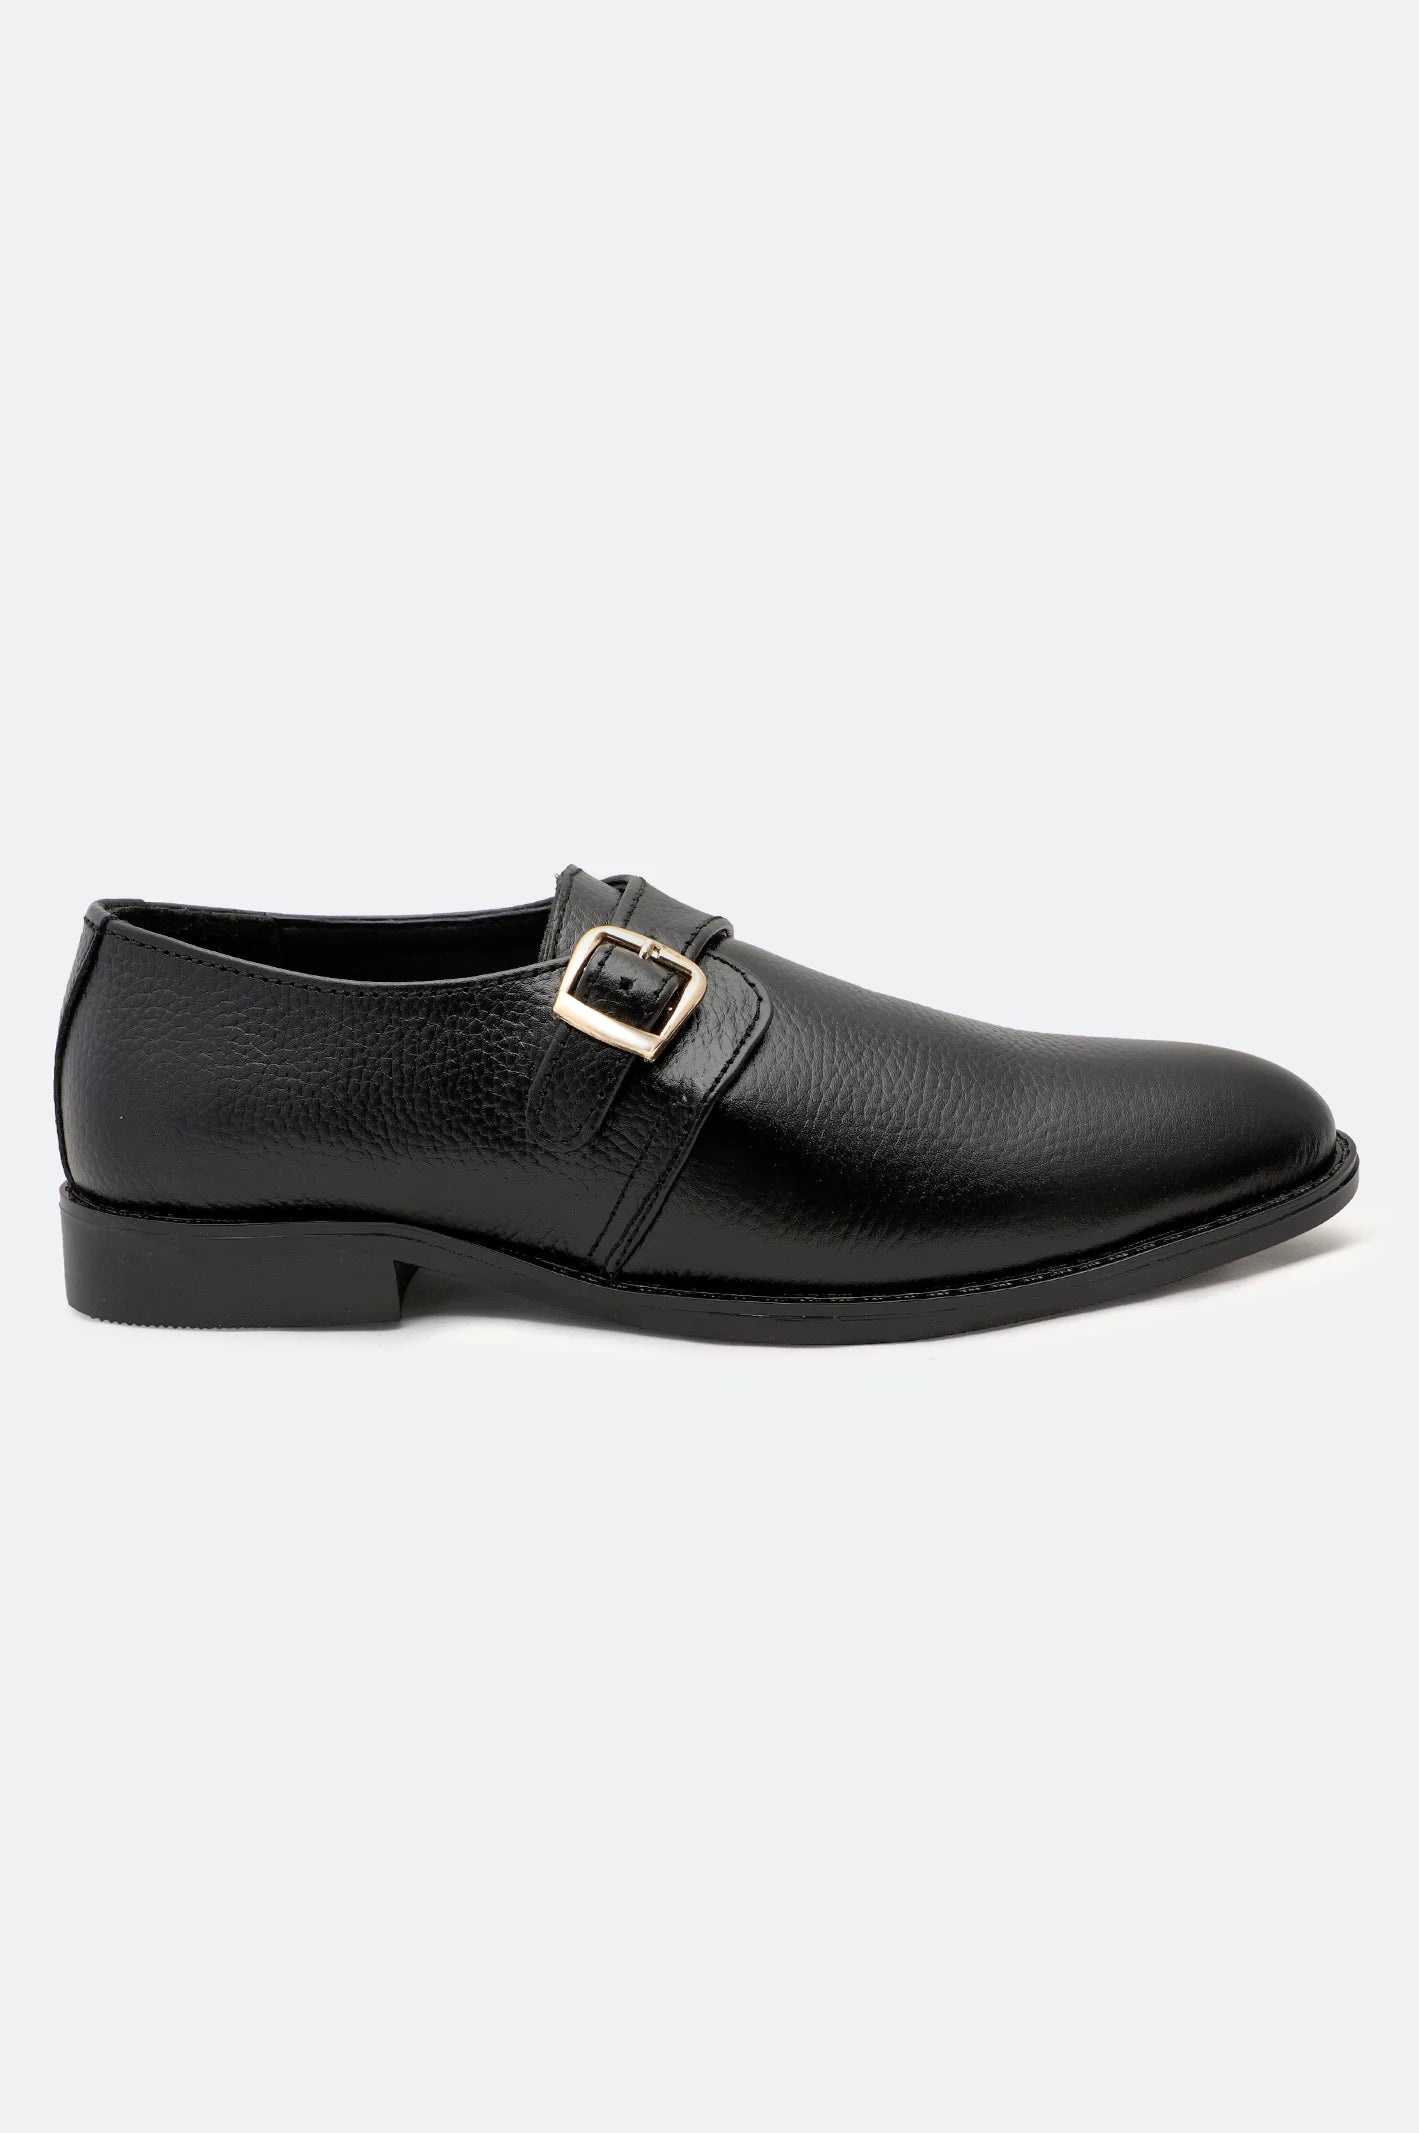 Black Formal Monk Shoes From Diners